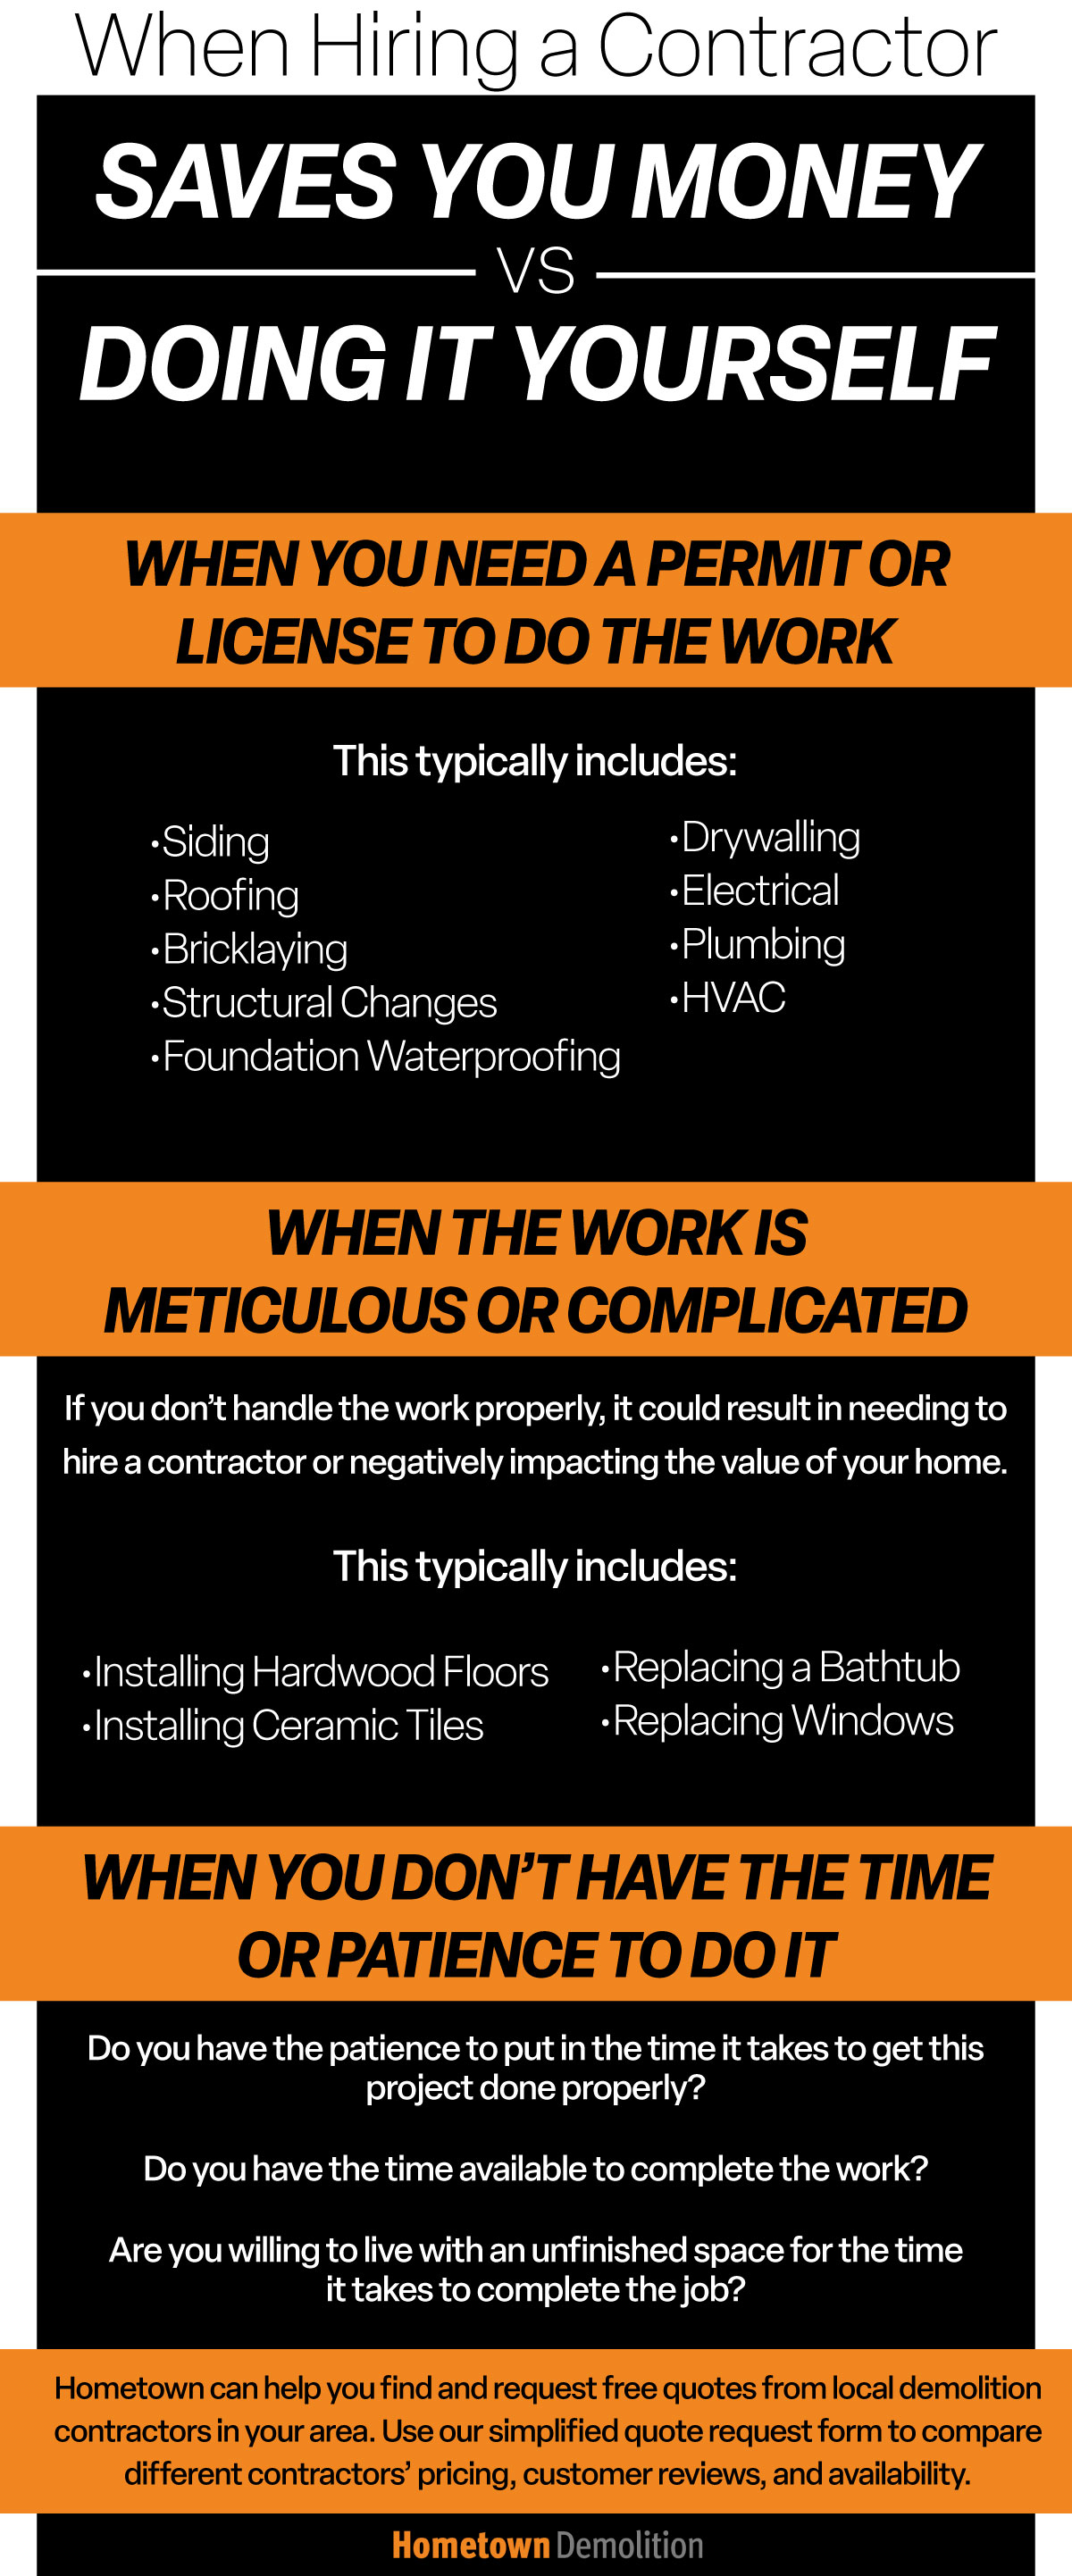 When Hiring a Contractor Saves You Money vs. Doing It Yourself Infographic